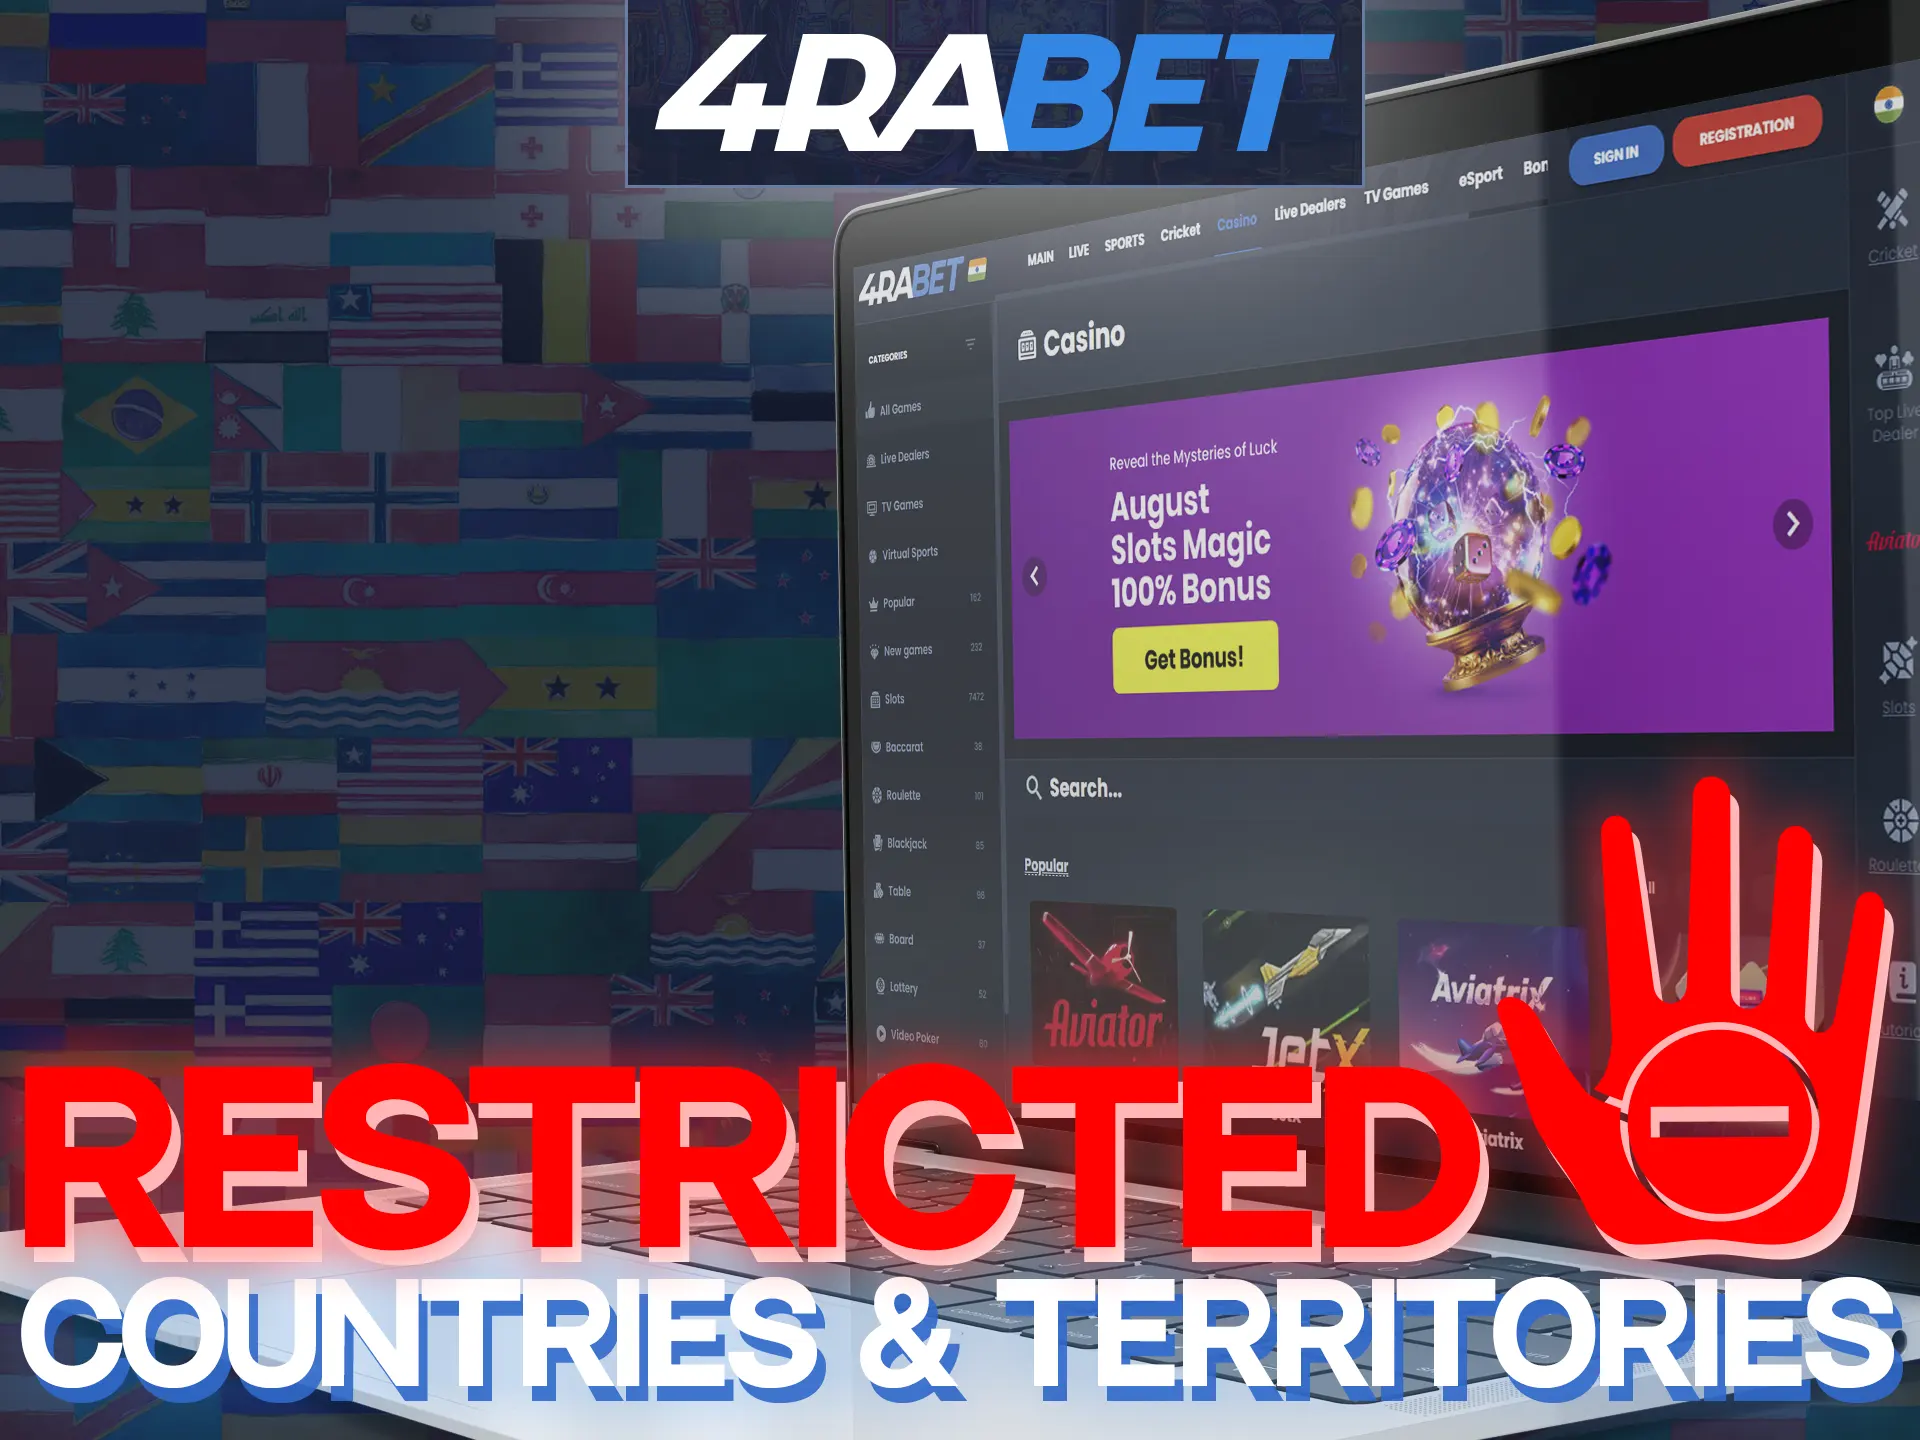 Players from these countries cannot access 4Rabet online casino.